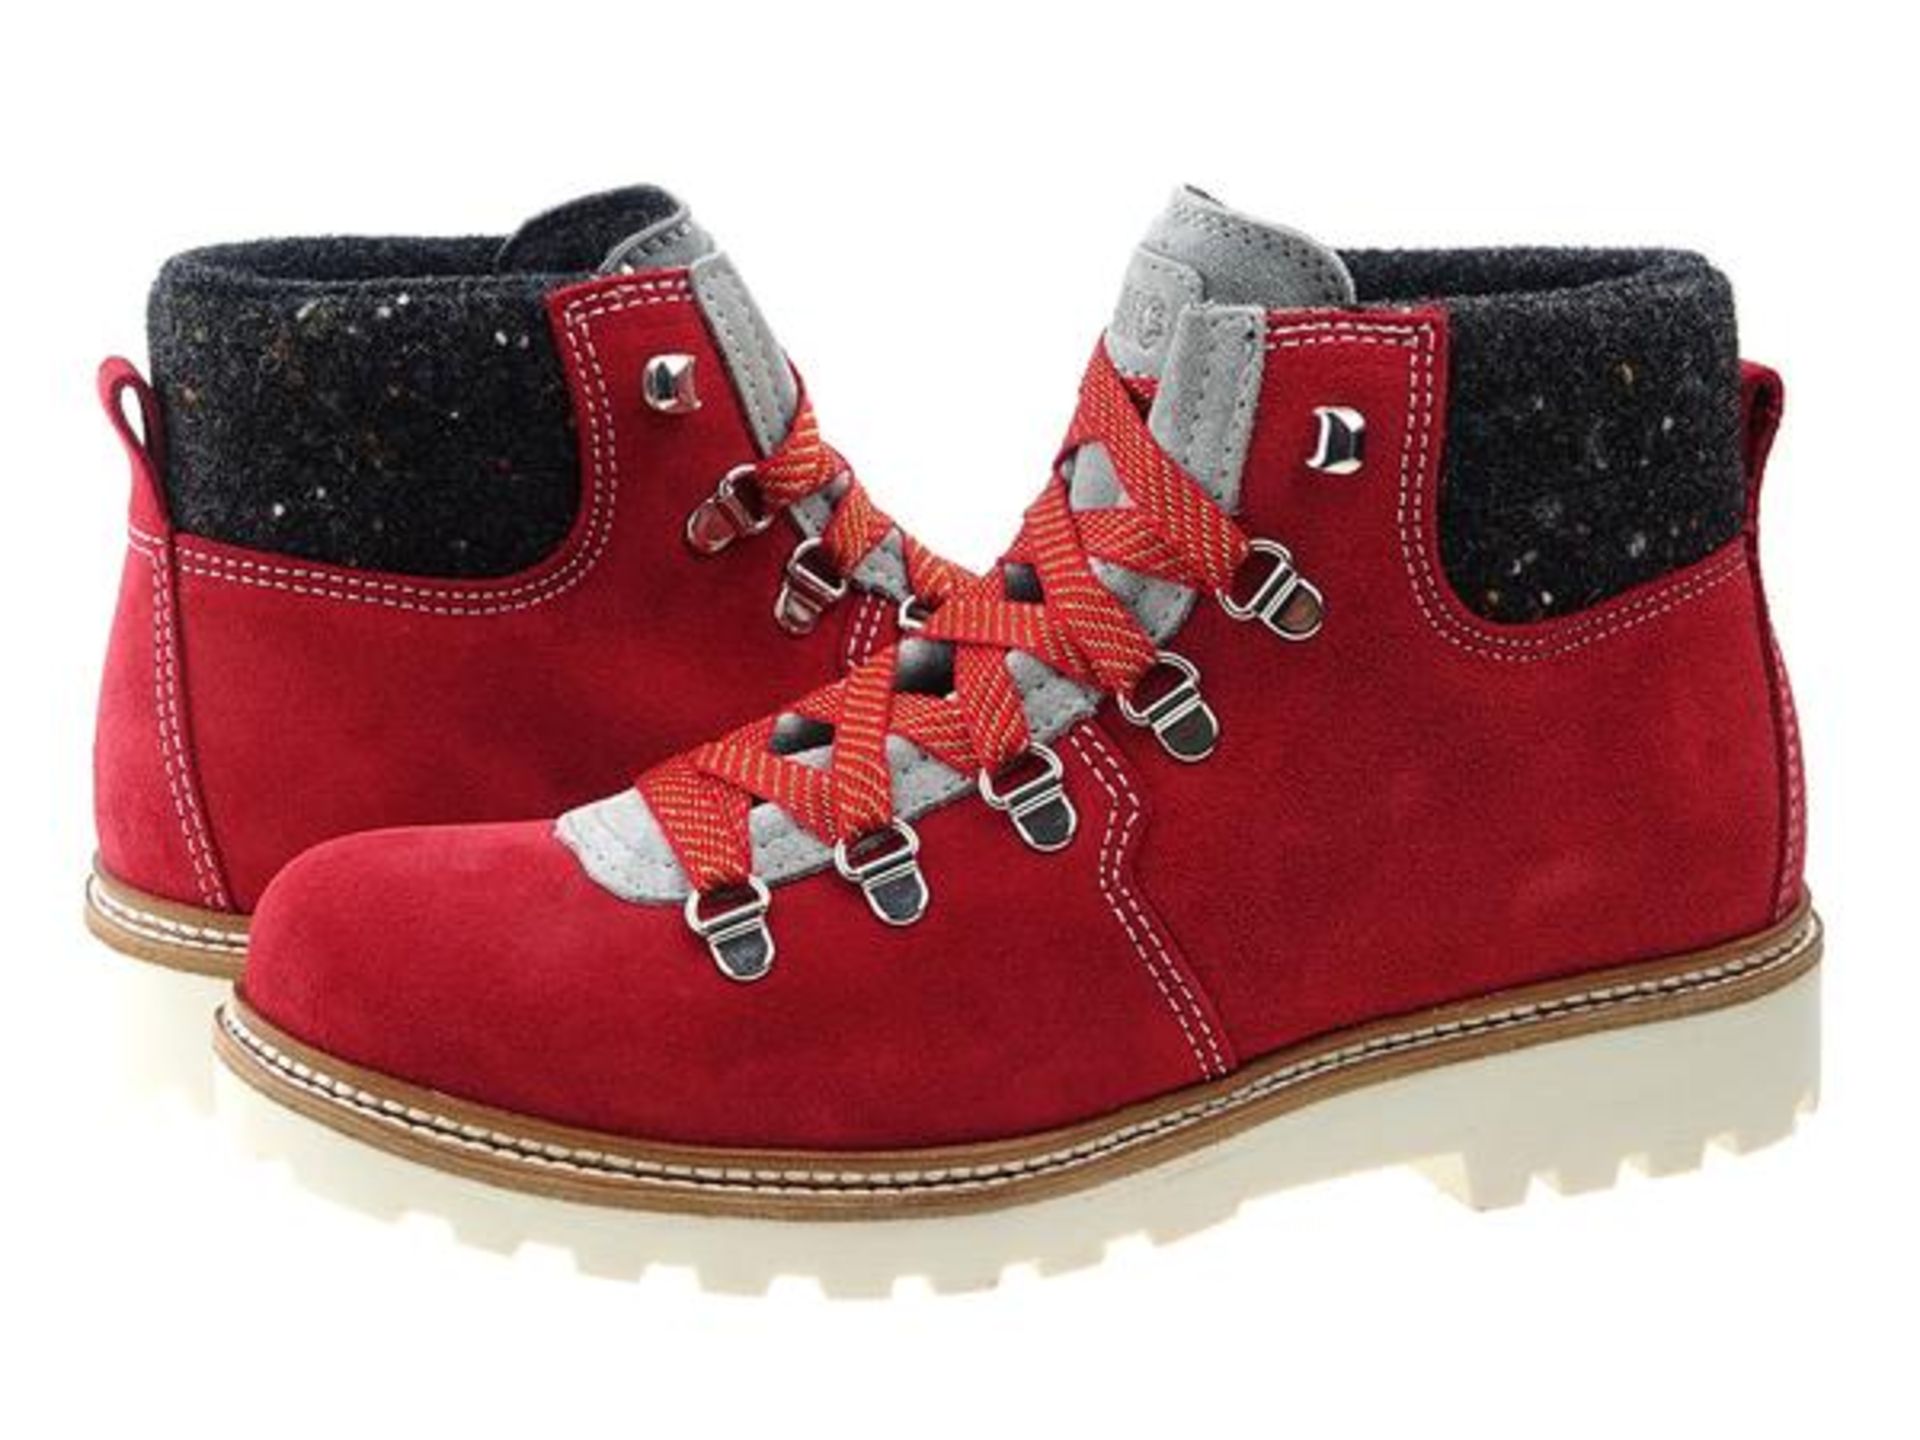 1 x Pair of Designer Olang Merano BTX 815 Rosso Women's Winter Boots - Euro Size 38 - Brand New - Image 4 of 4